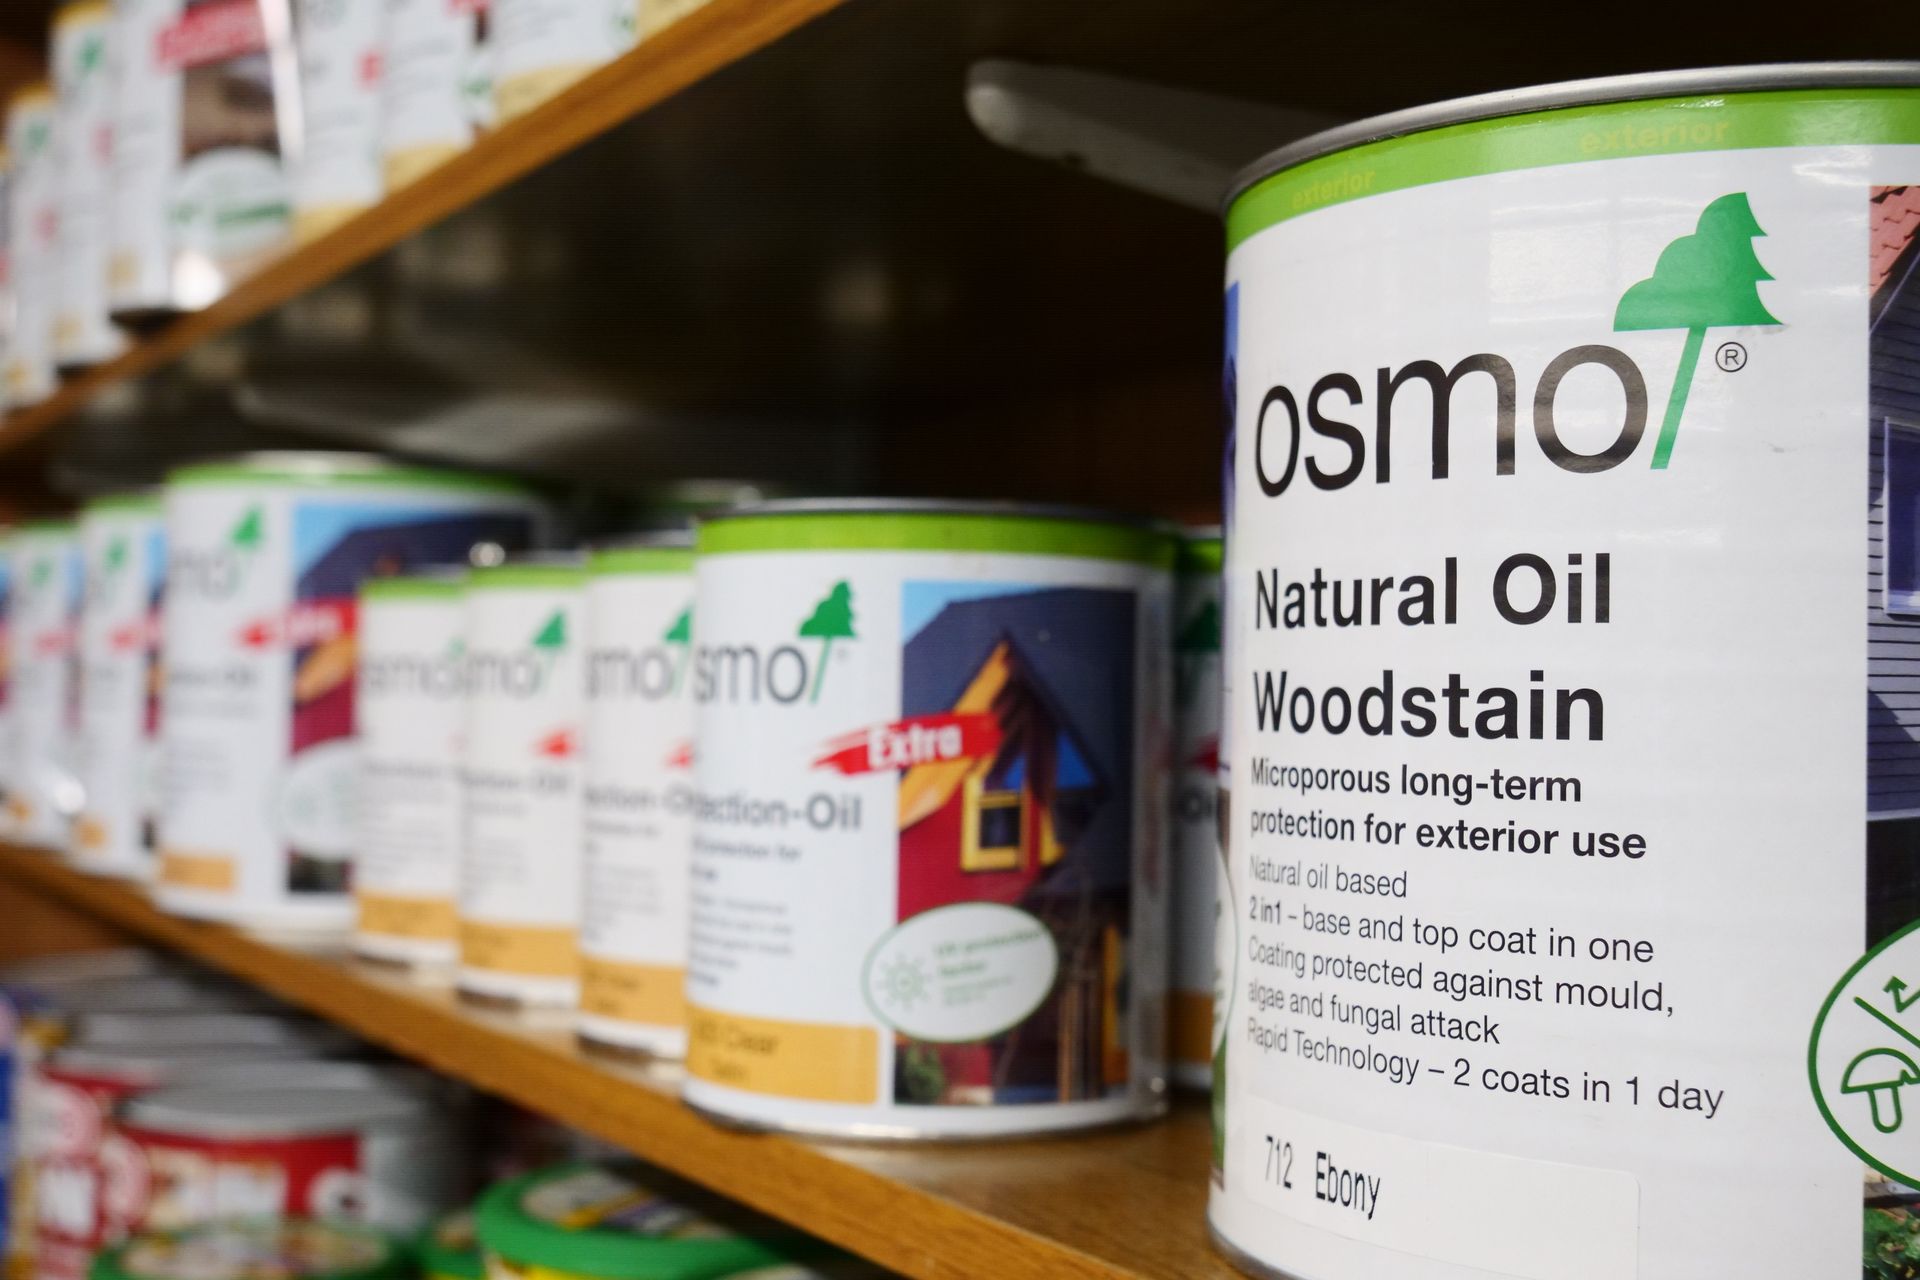 a shelf filled with cans of osmo natural oil woodstain